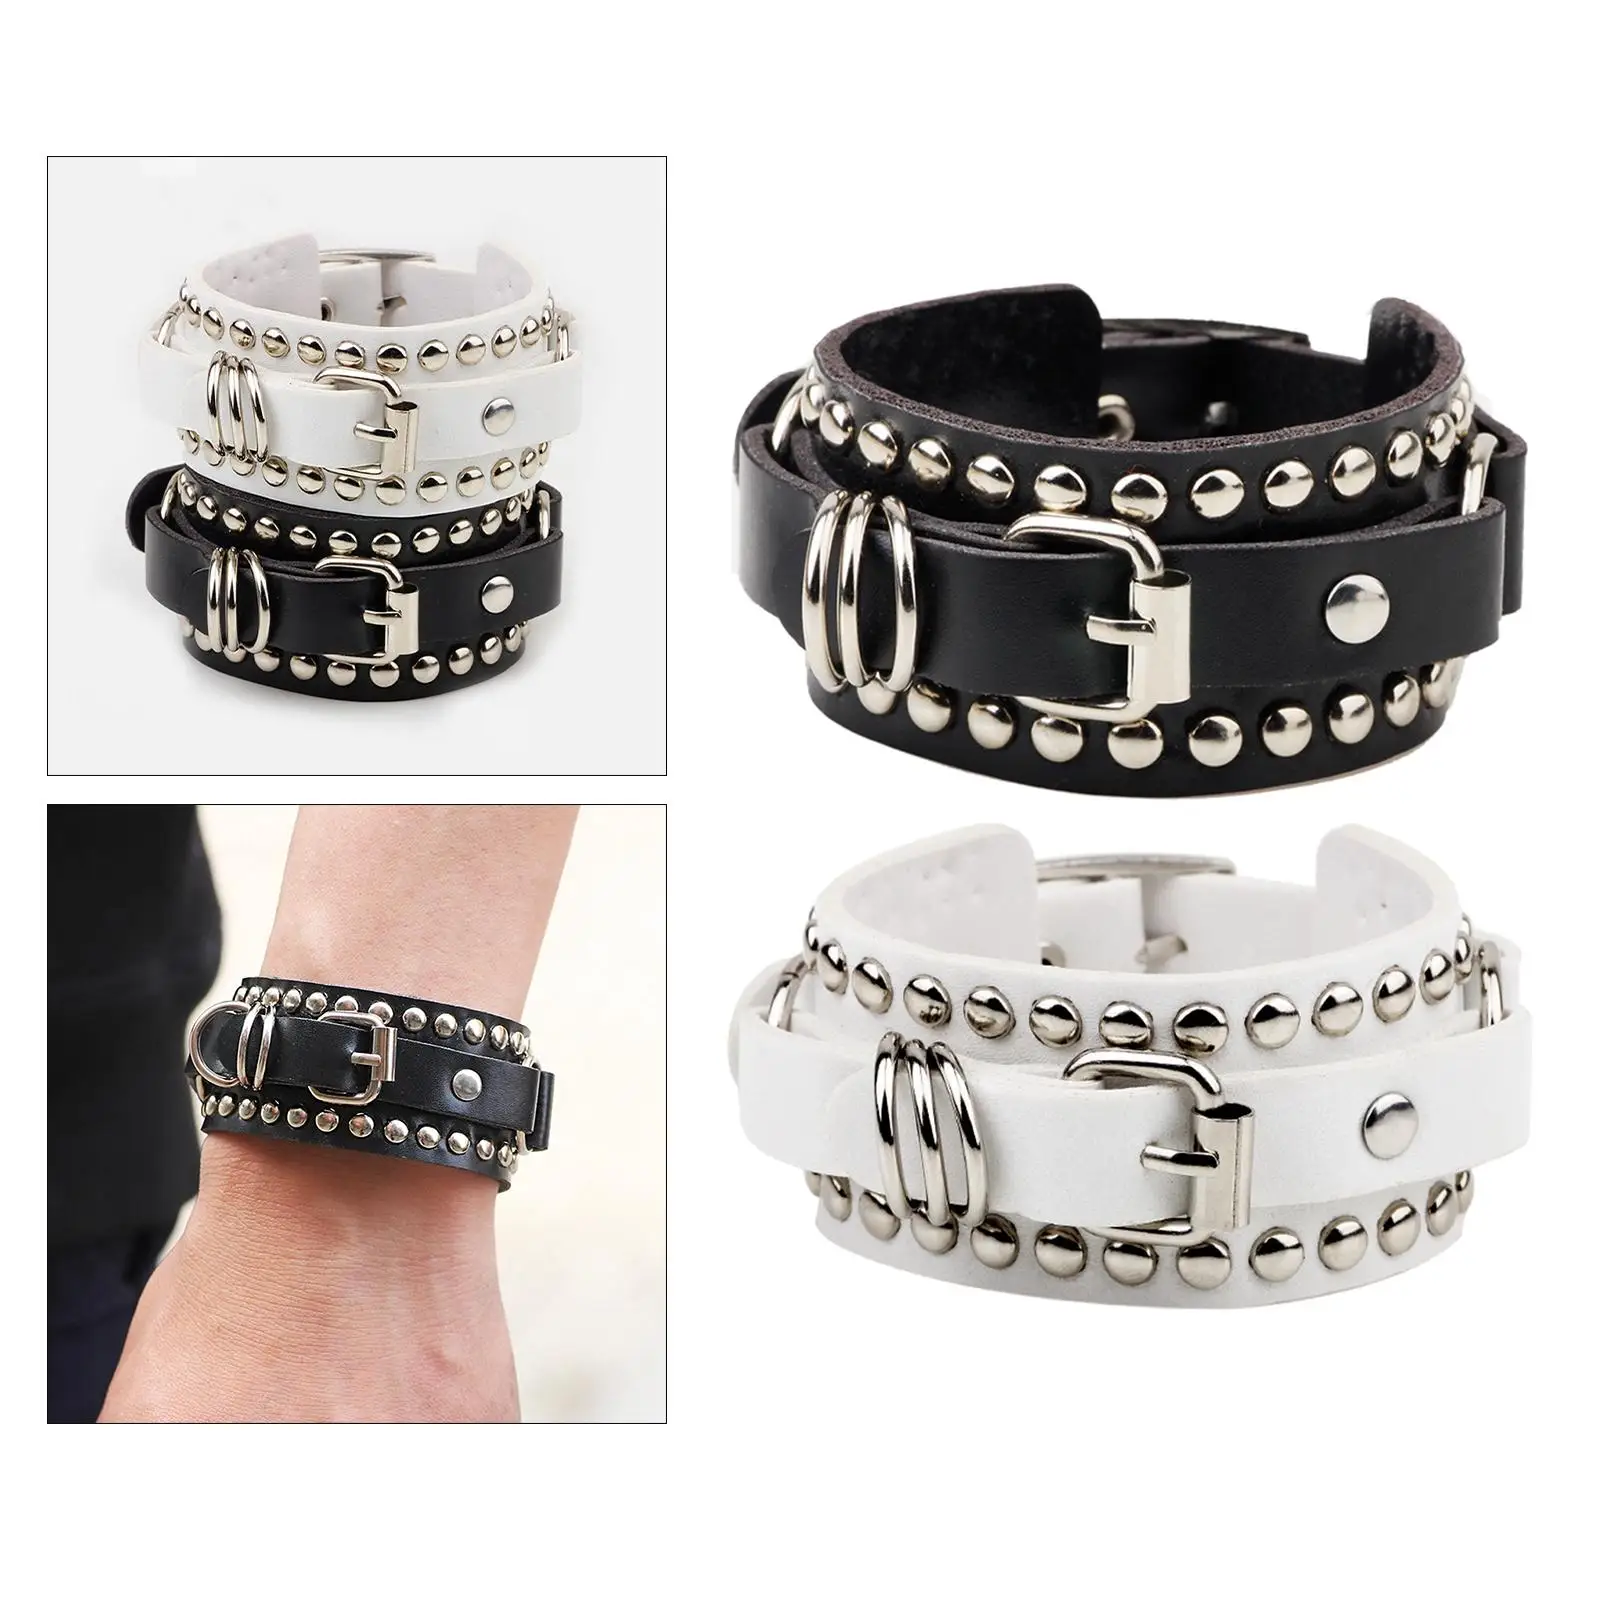 Wrap Cuff Bracelets Adjustable Metal Buckle Party Favor Chic Gift Punk Studded Wristband for Parties Halloween Biker Men, Ladies